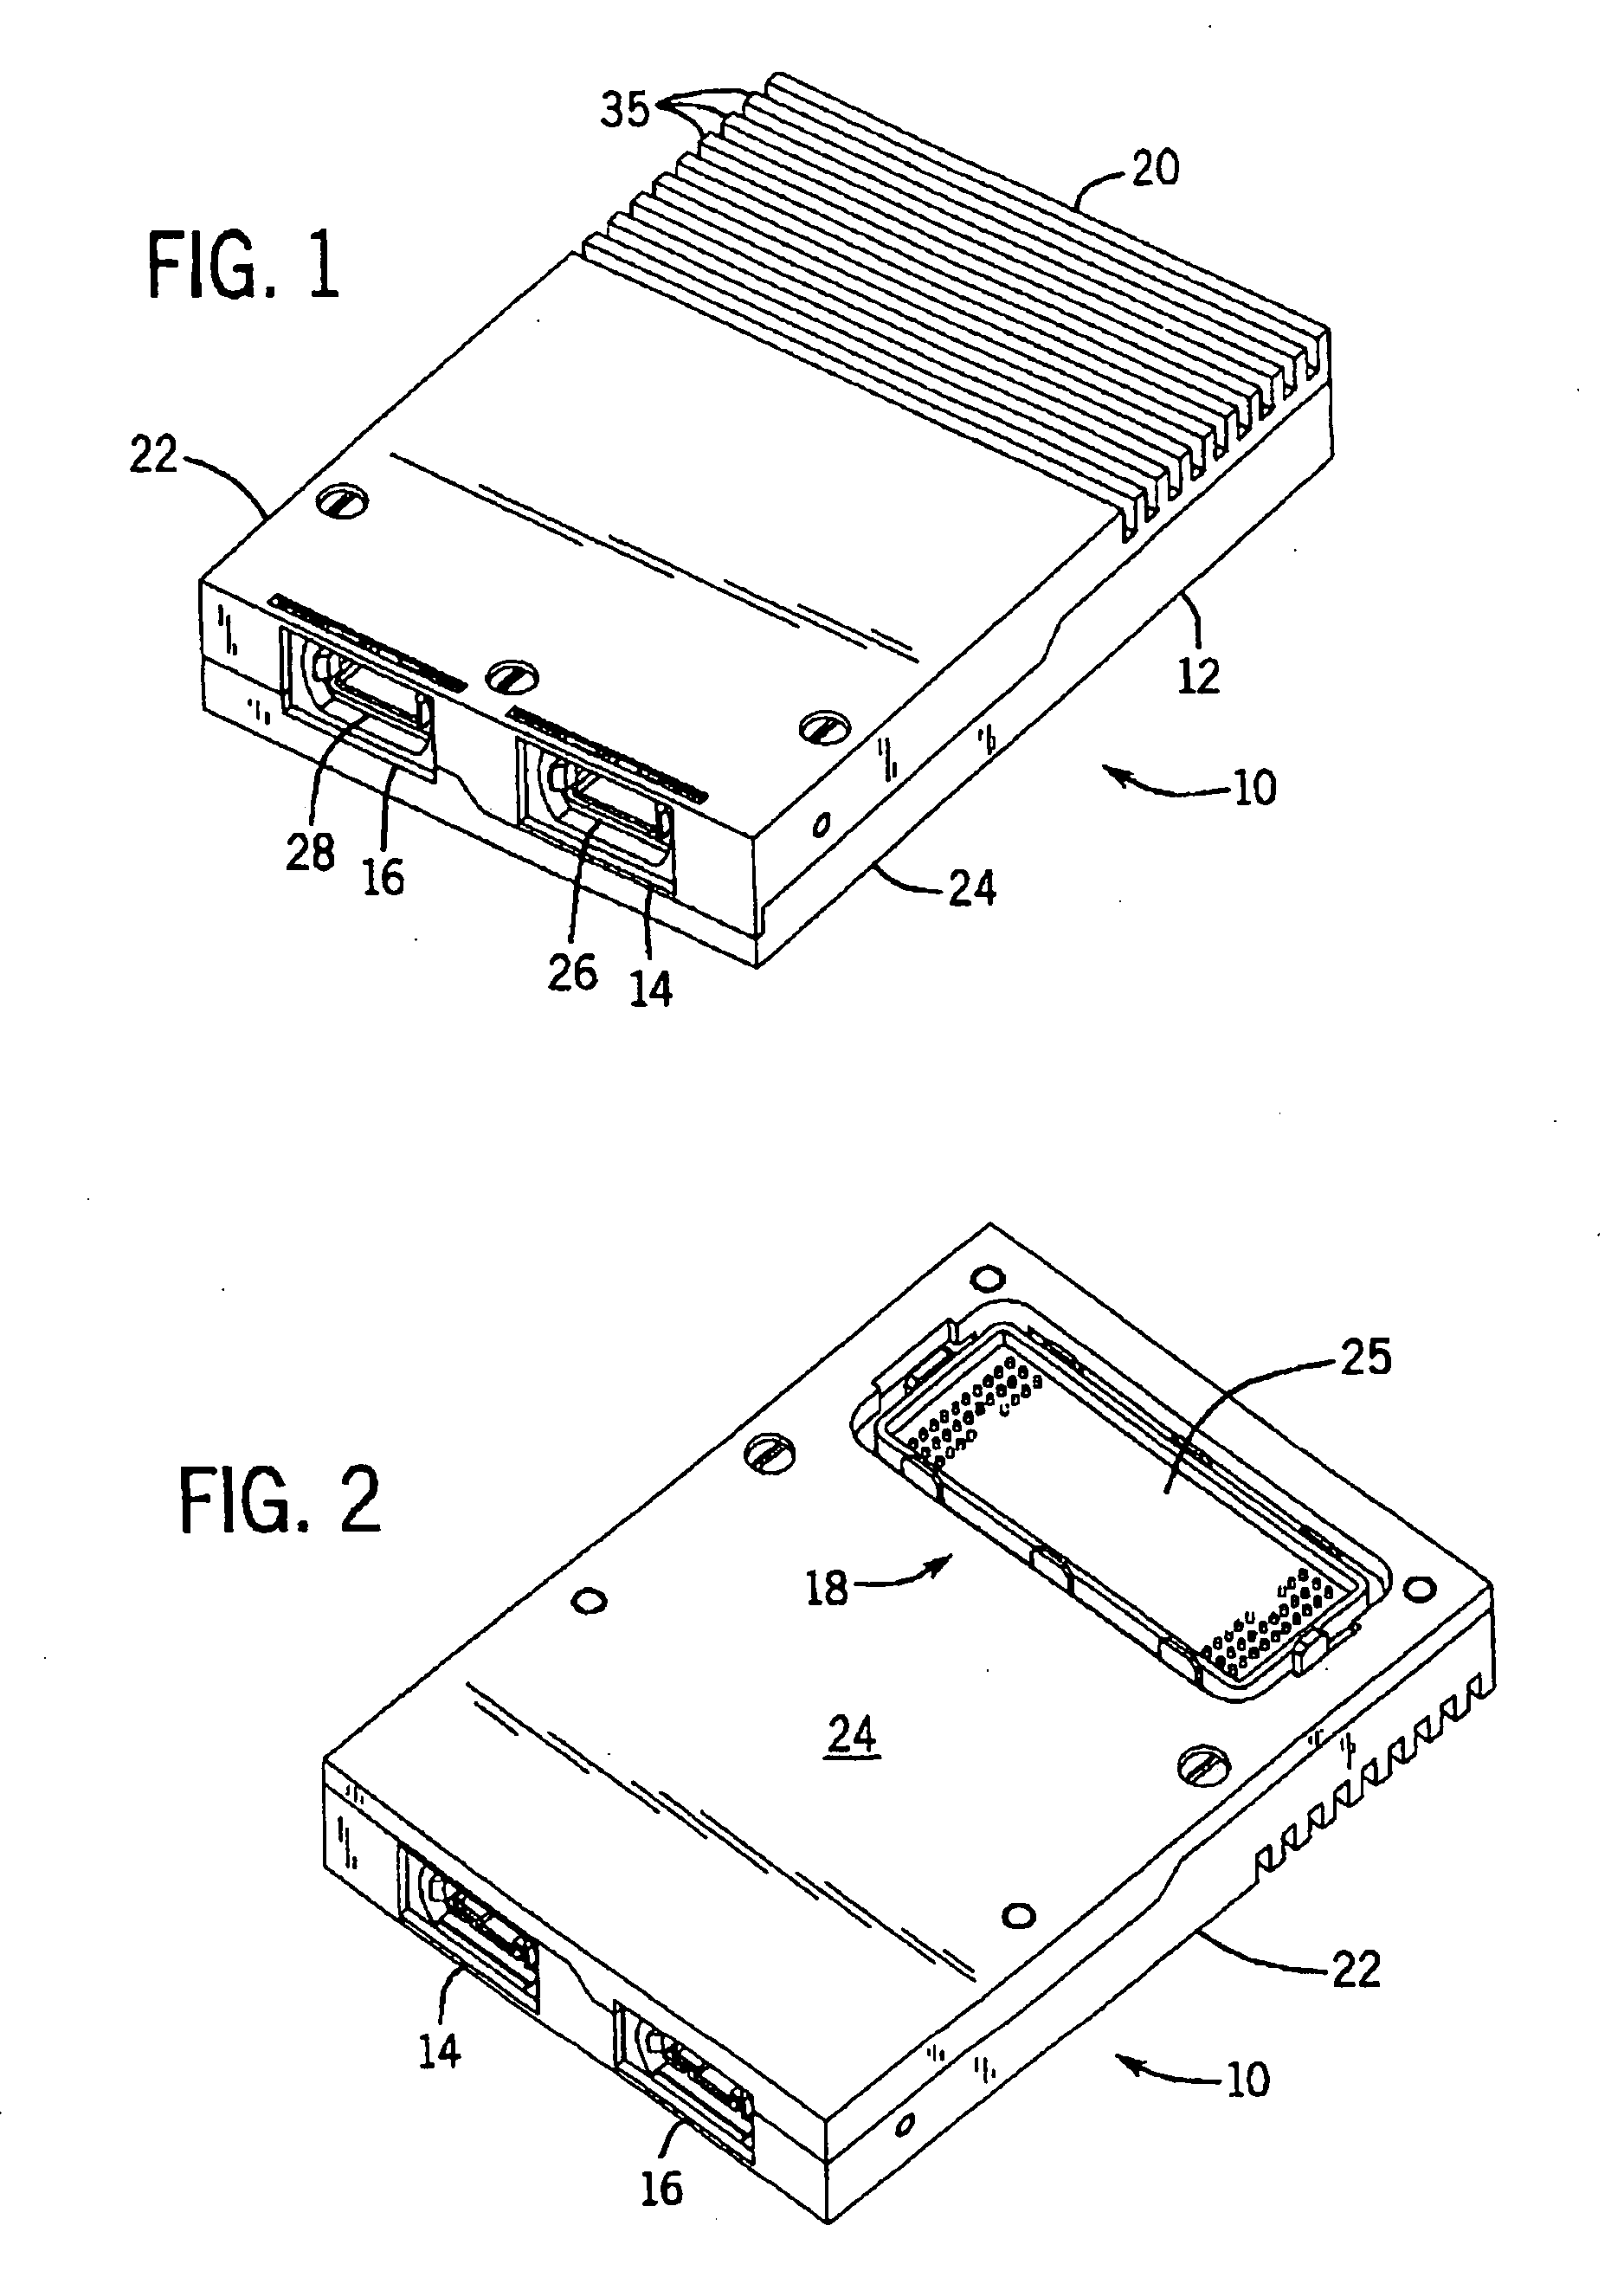 Transponder assembly for use with parallel optics modules in fiber optic communications systems